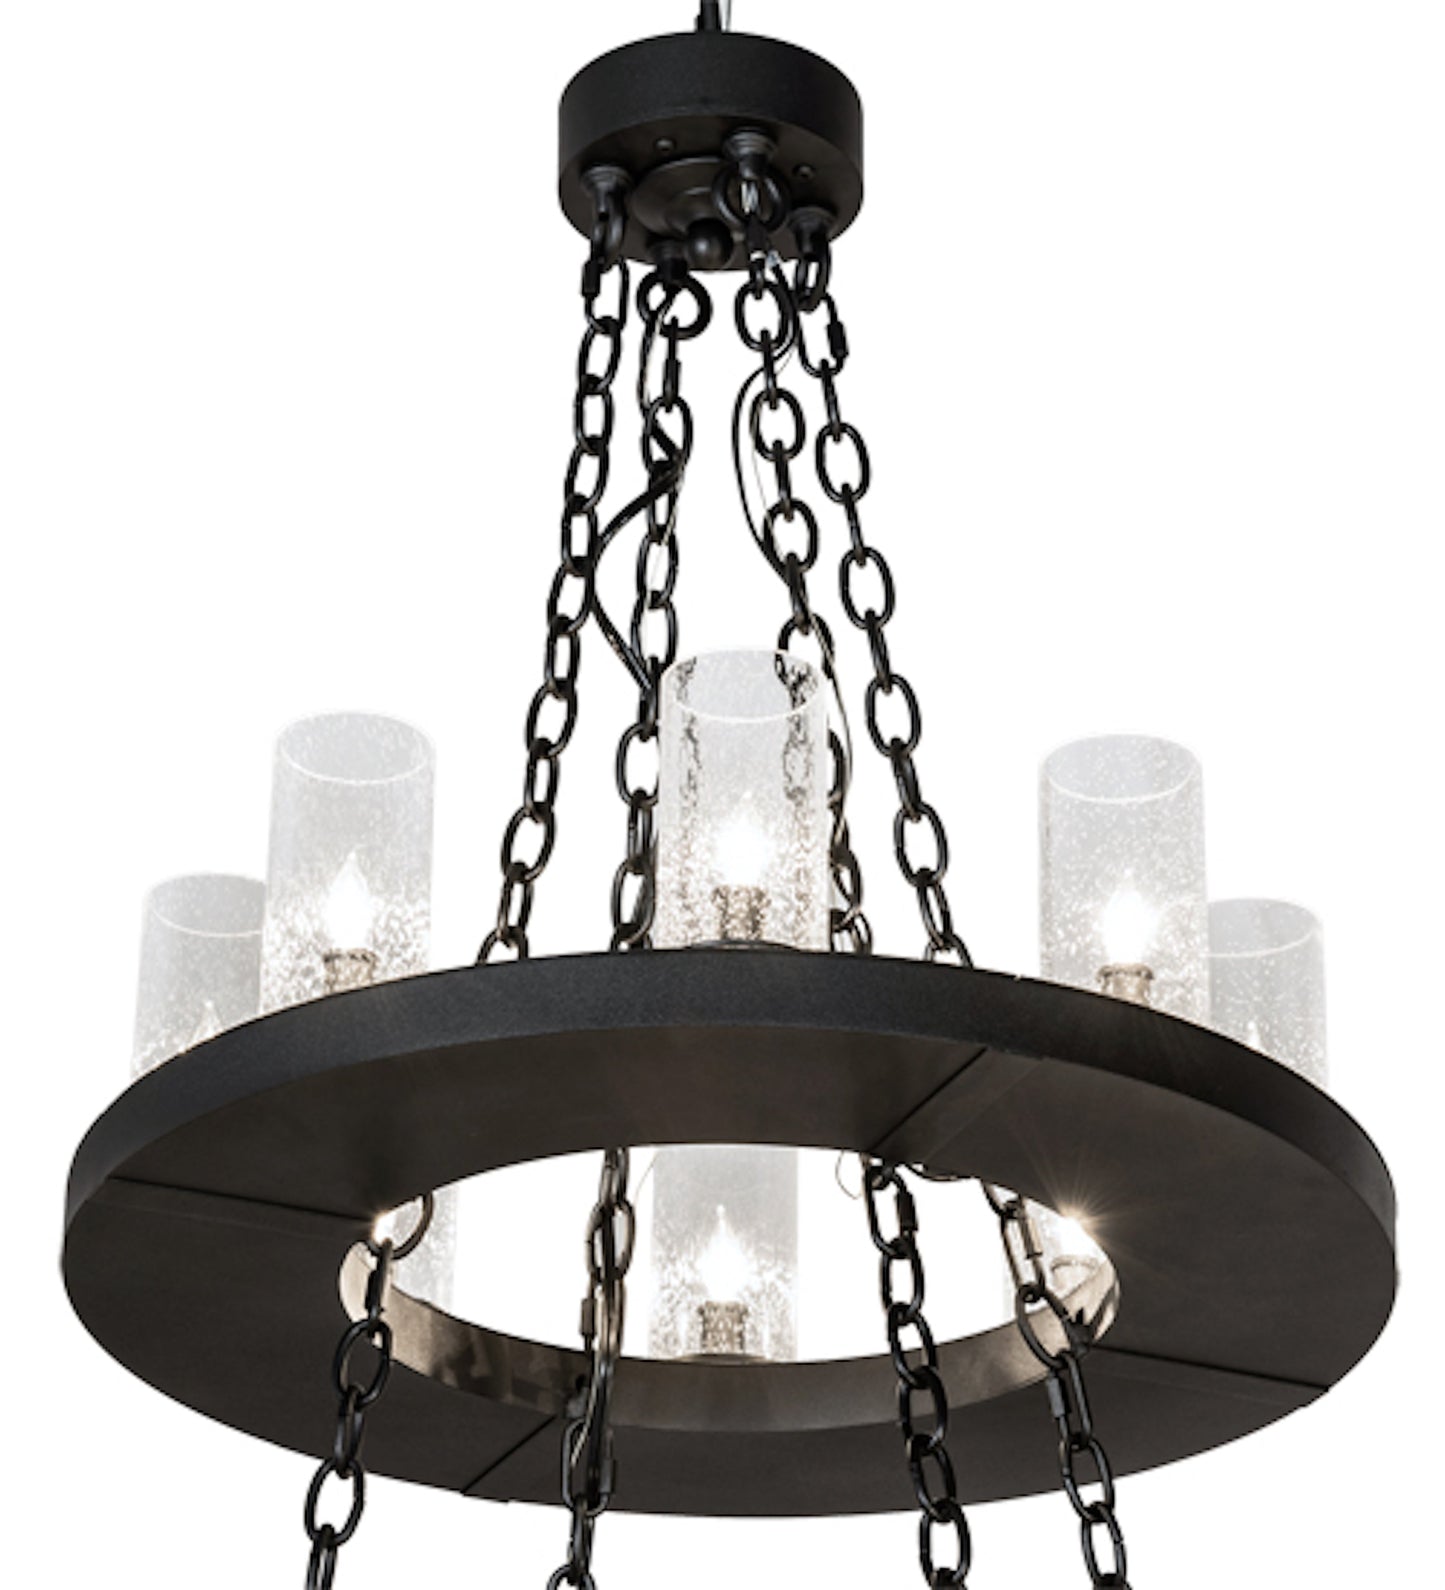 42" Loxley 20-Light Two Tier Chandelier by 2nd Ave Lighting